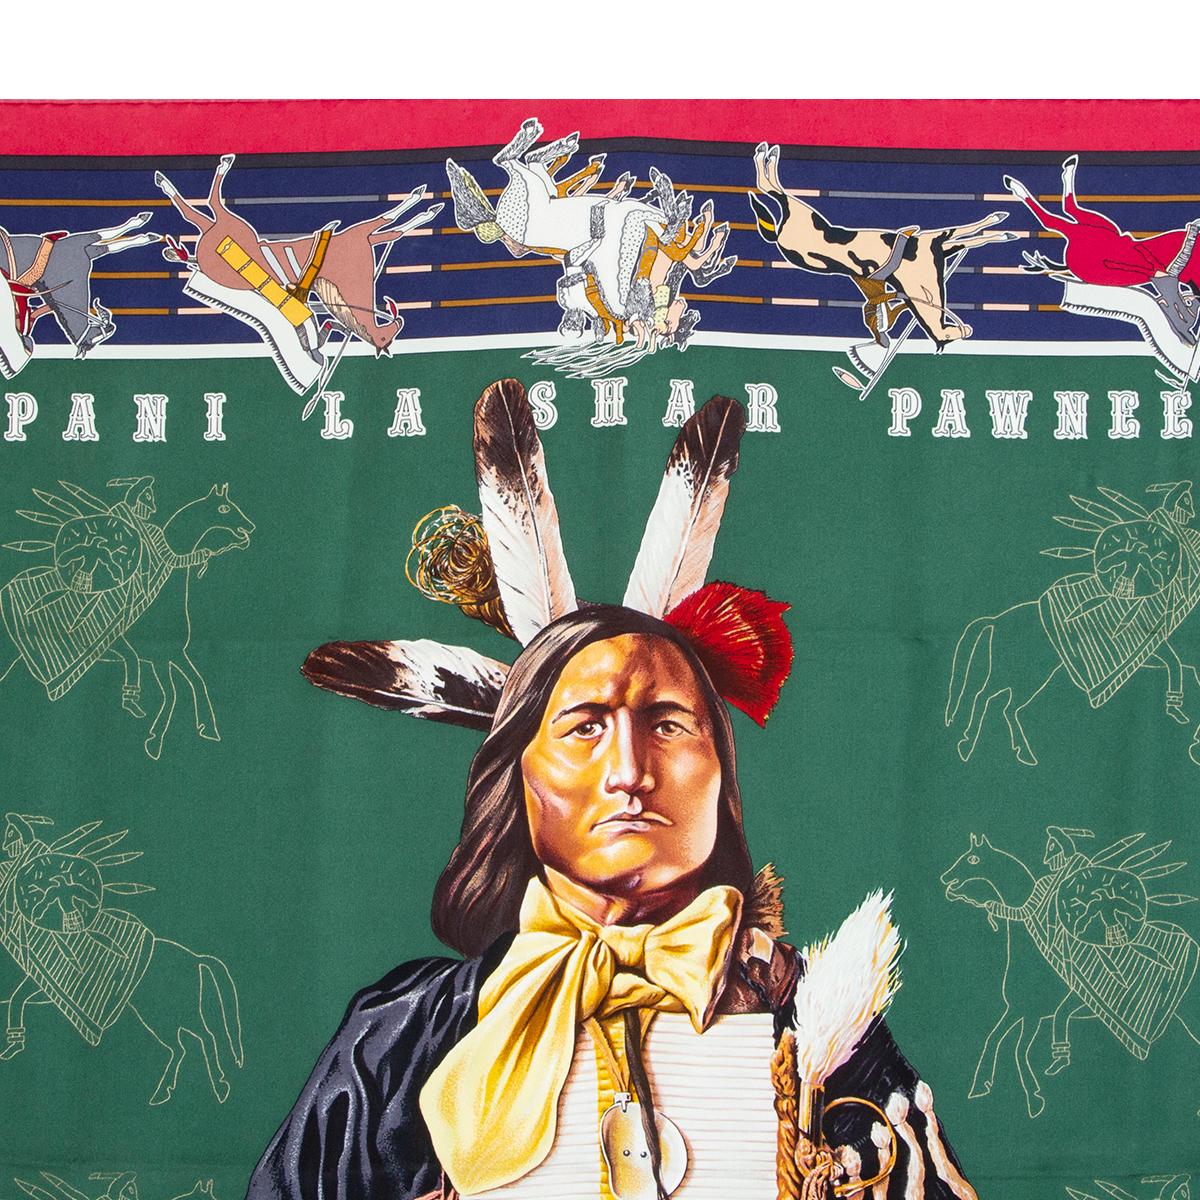 Hermes 'Pani La Shar Pawnee 90' scarf in burgundy and green wash twill (100%) with details in dark purple and multicolor. Brand new with tag.

Width 90cm (35.1in)
Height 90cm (35.1in)